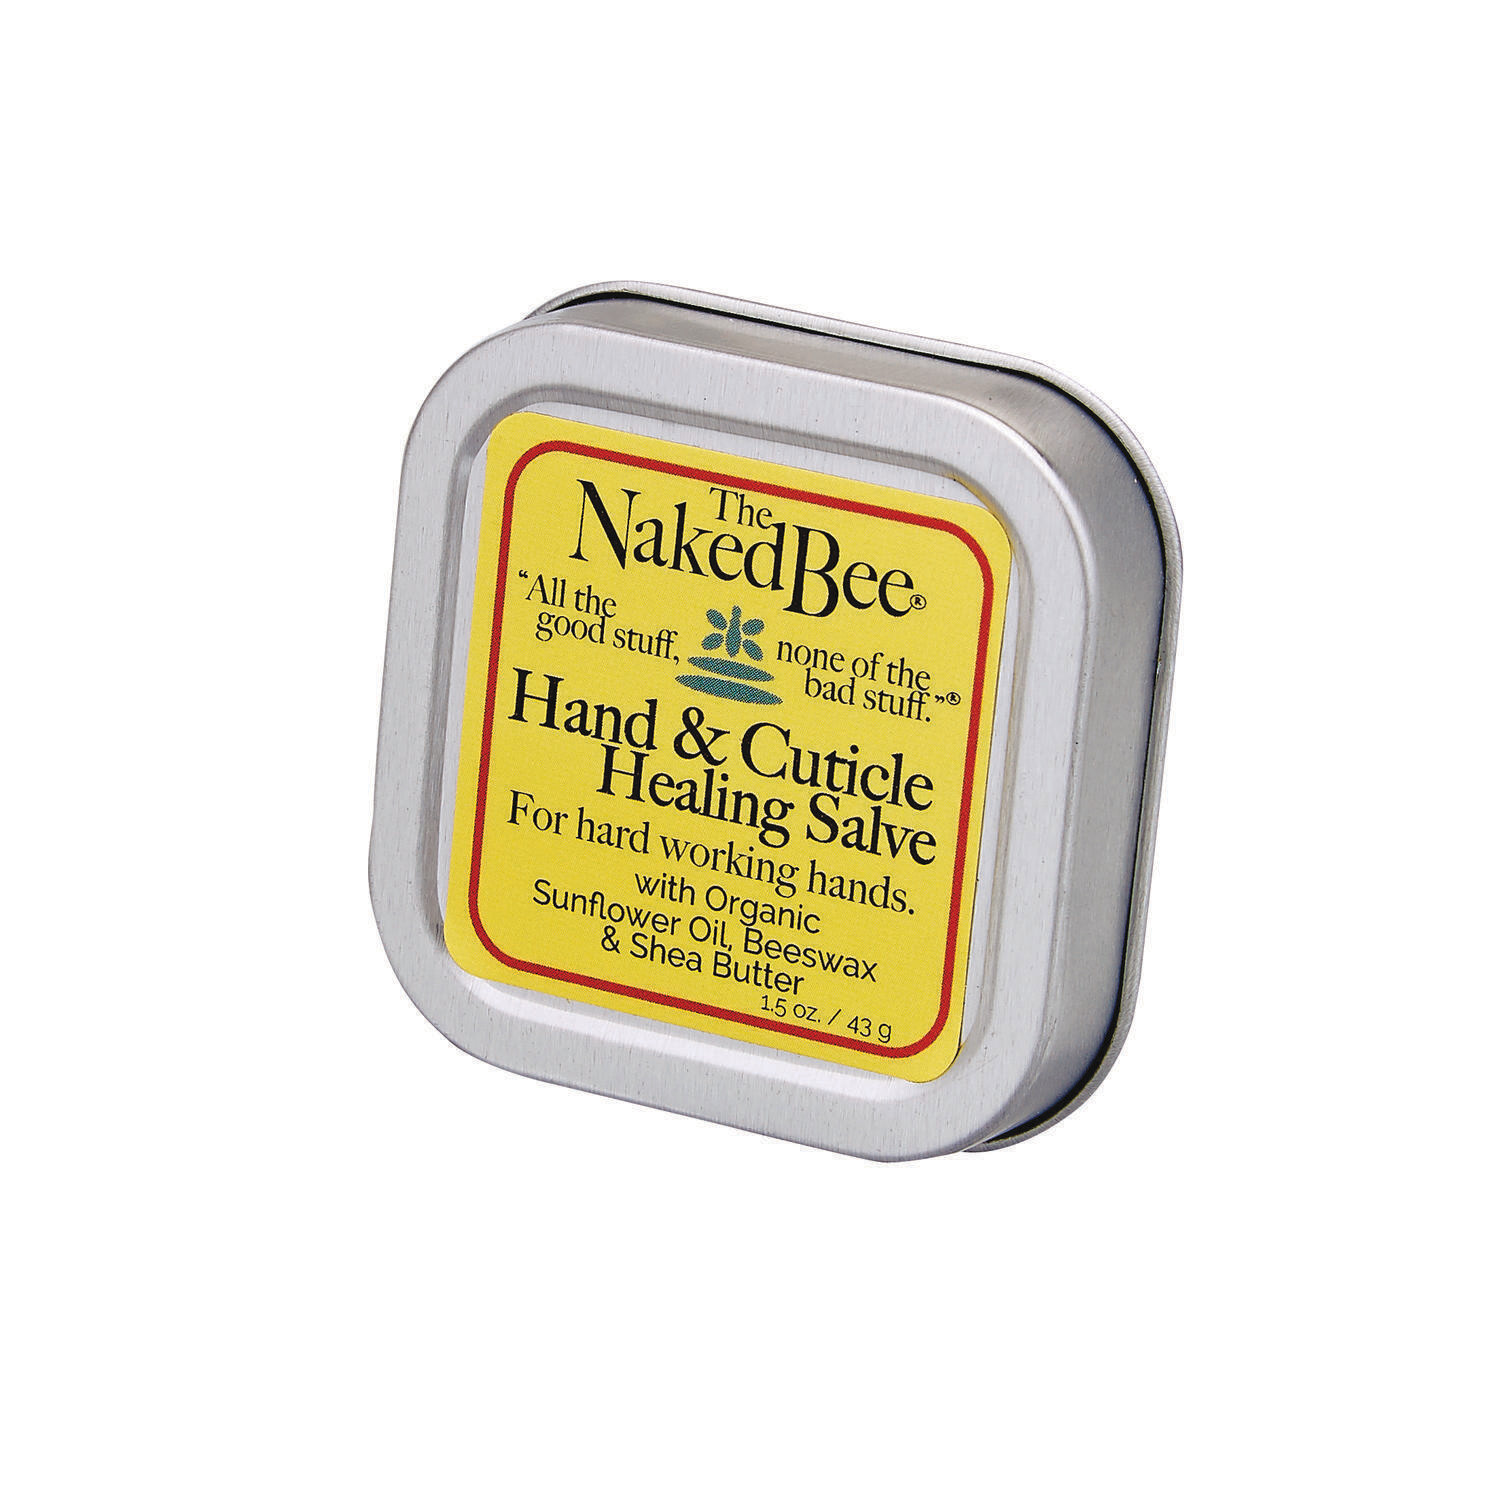 The Naked Bee Hand &amp; Cuticle Healing Salve (1.5 oz/Sunflower